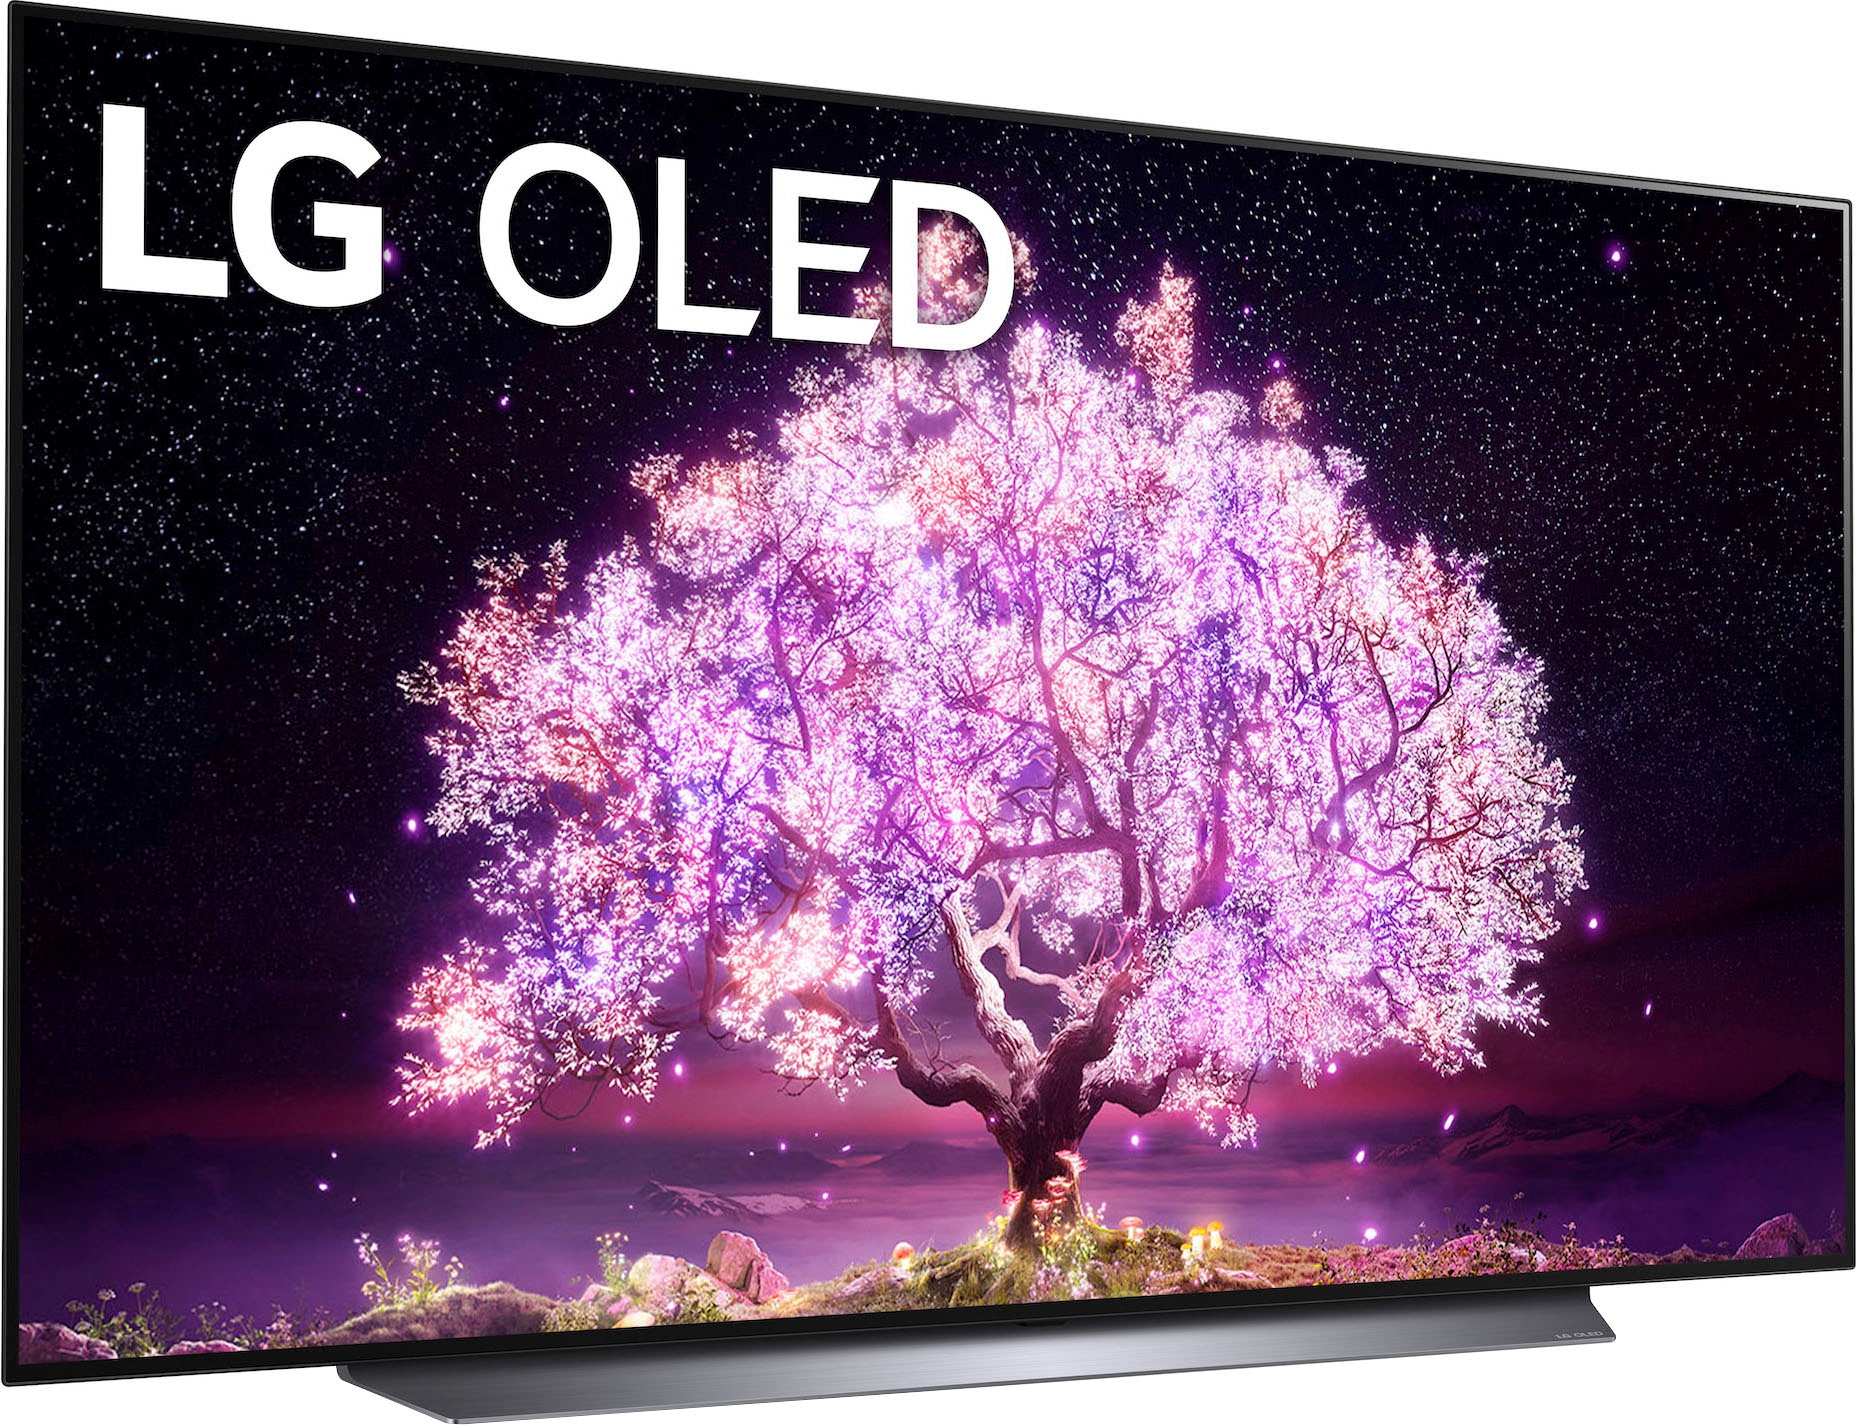 4K OLED-Fernseher Smart-TV, AI-Prozessor,Dolby HD, Dolby bei cm/77 & OLED jetzt 195 LG Zoll, kaufen Ultra »OLED77C17LB«, Gen4 Vision OTTO ,α9 Atmos 4K